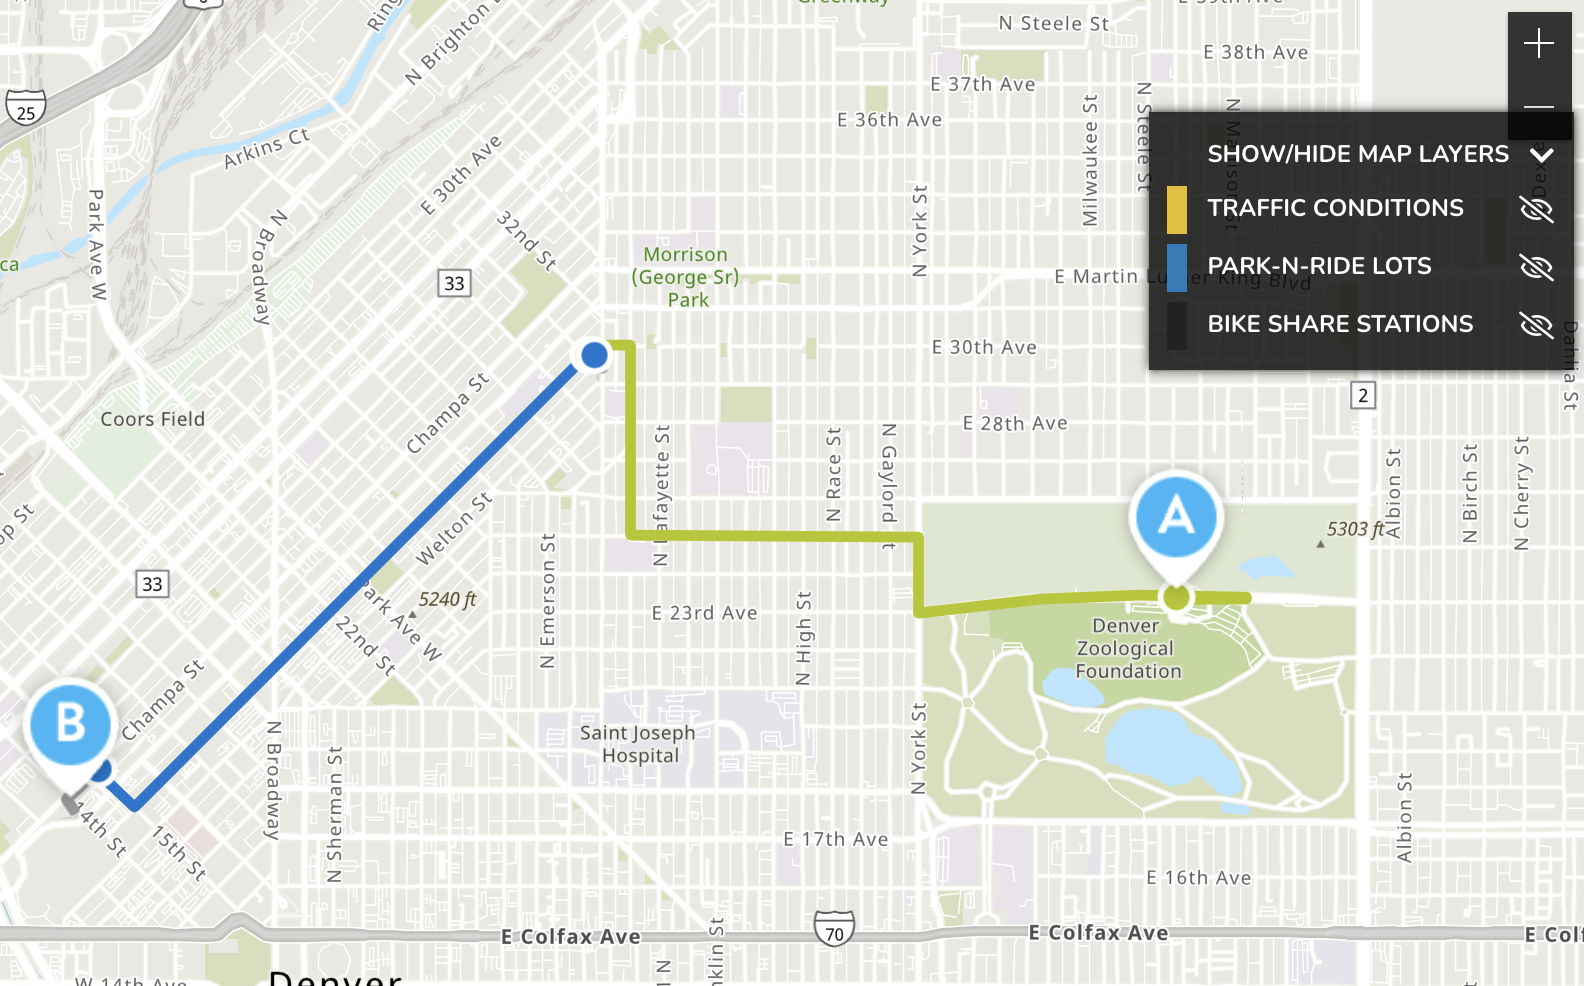 Map of Denver with a route planned